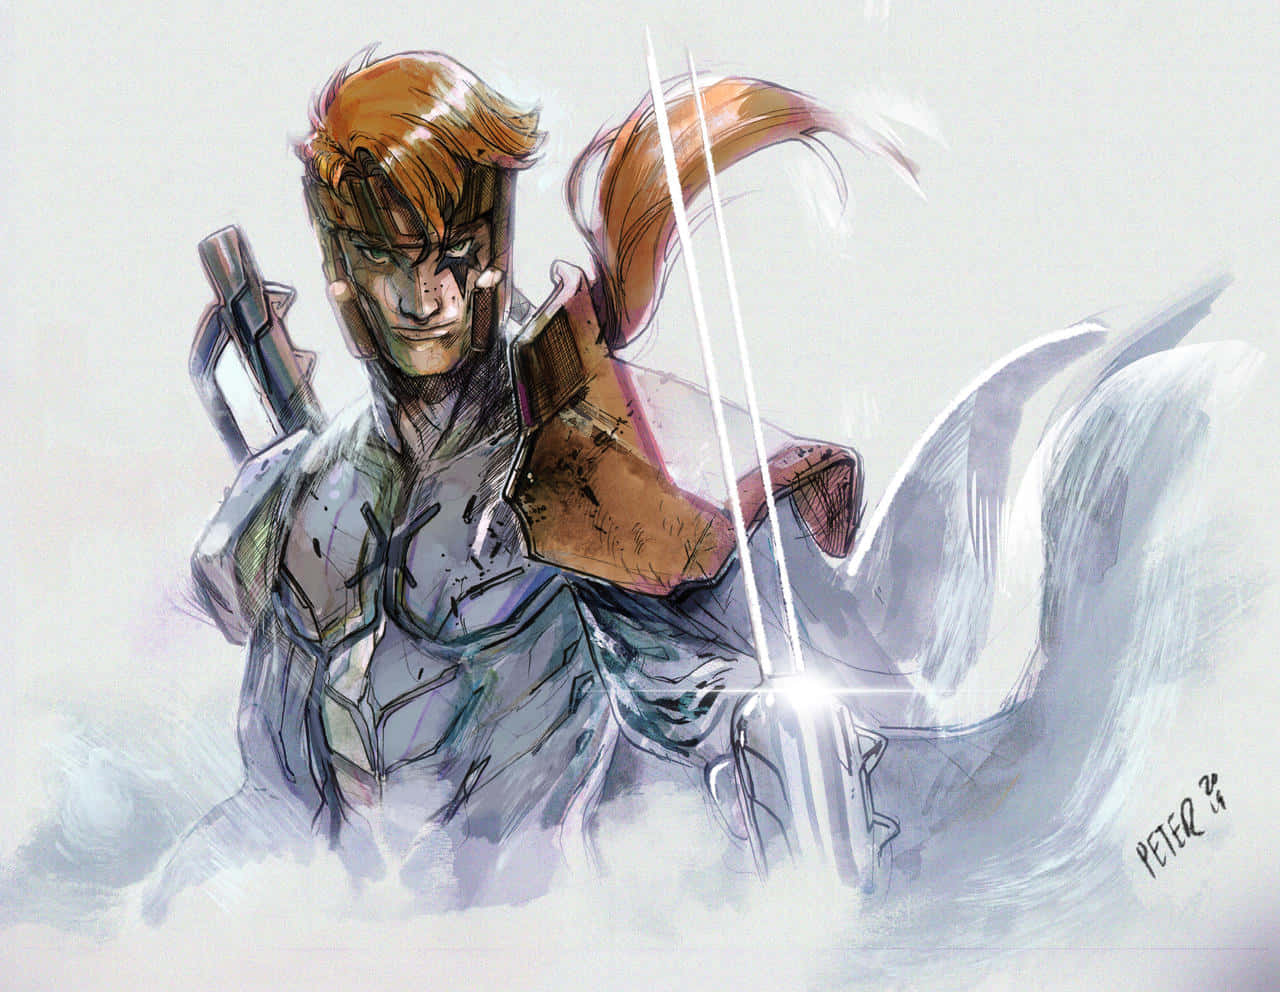 Shatterstar, Wielding Dual Blades, Ready for Action Wallpaper